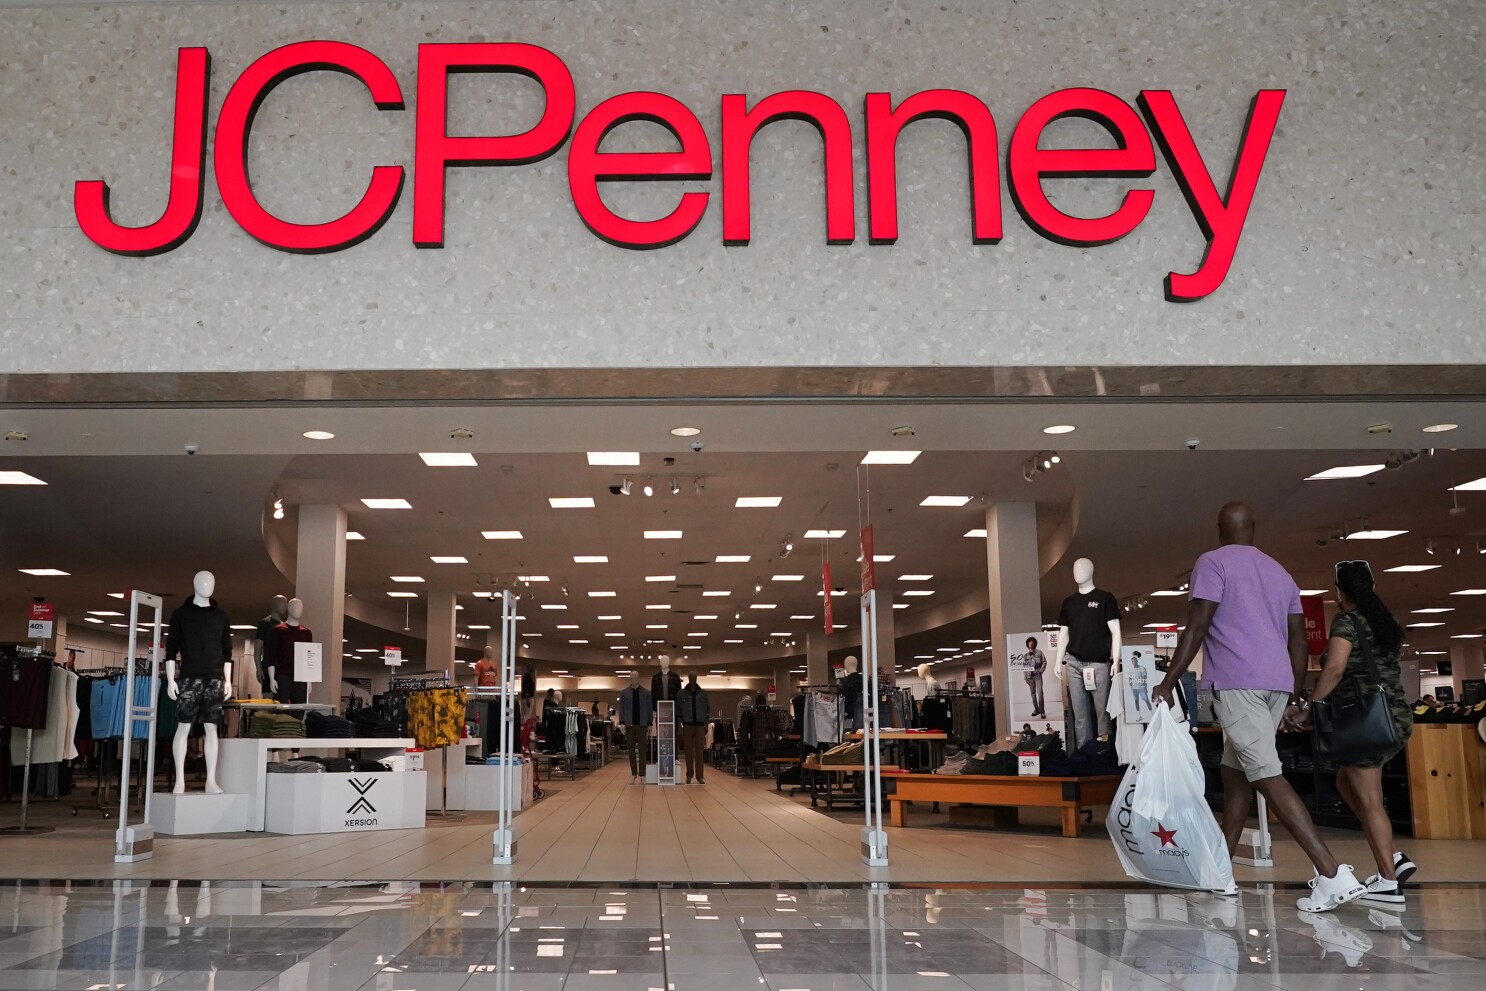 JCPenney is spending $1 billion on store and online upgrades in